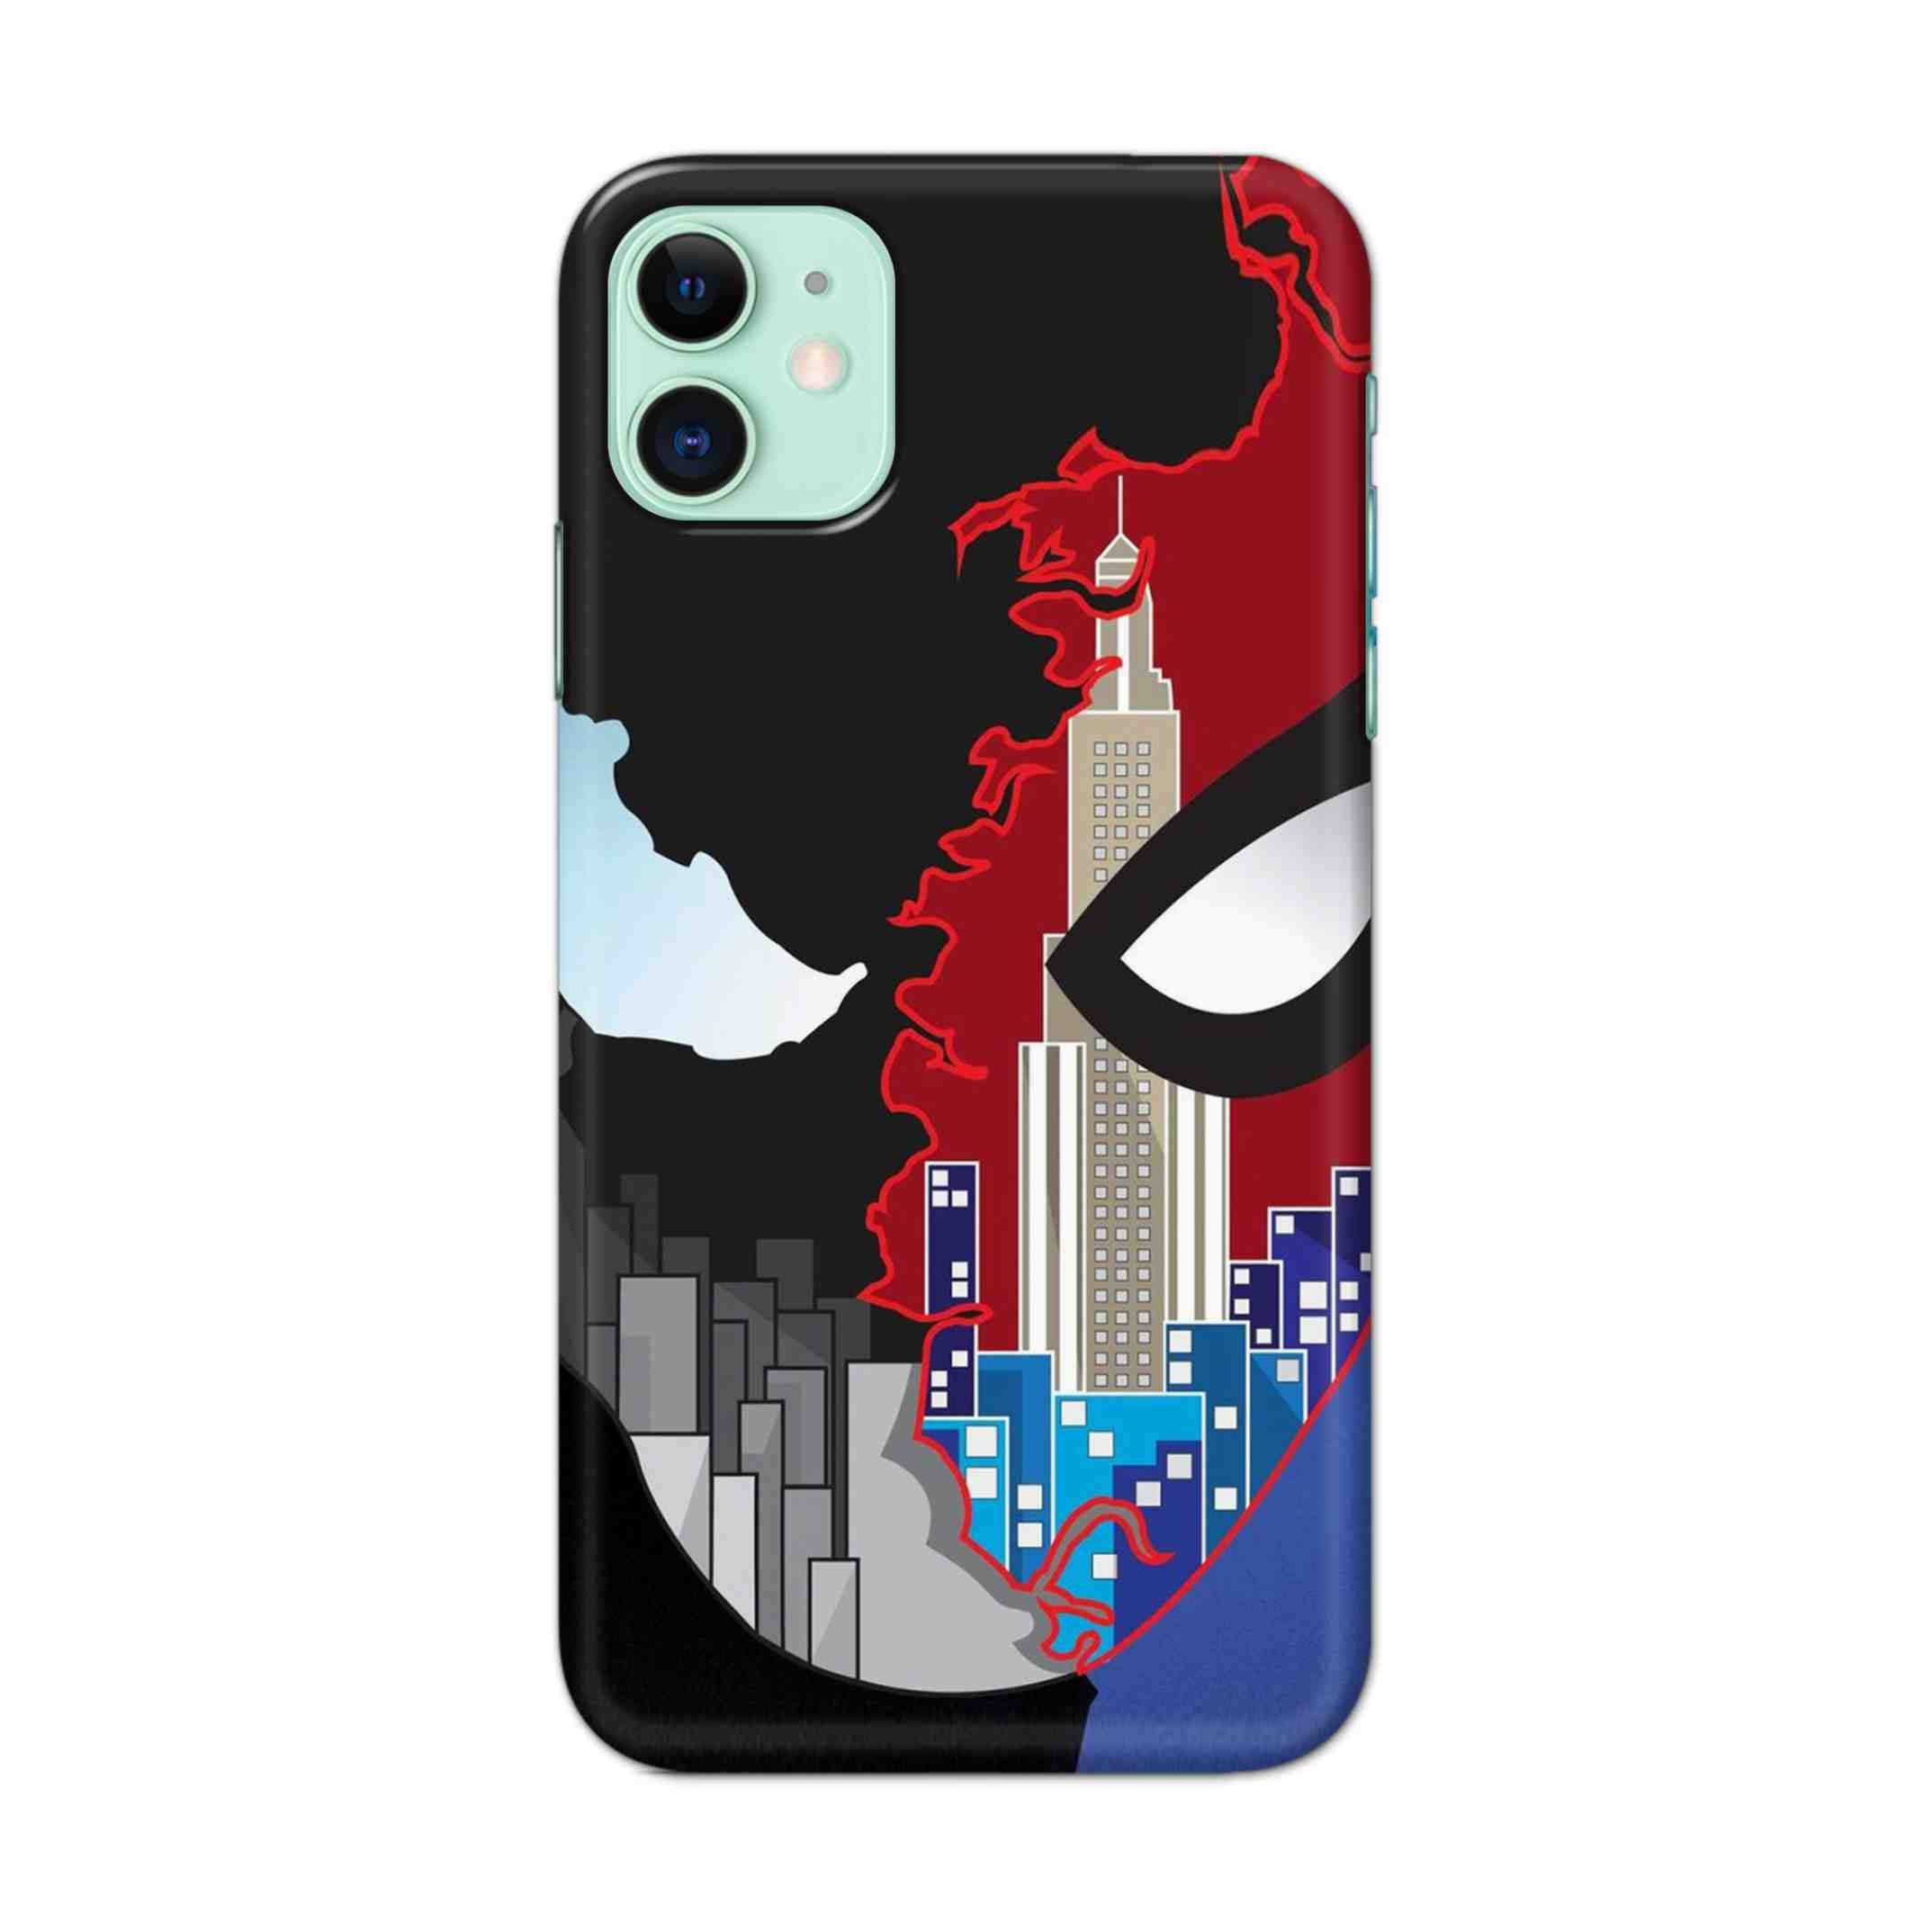 Buy Red And Black Spiderman Hard Back Mobile Phone Case/Cover For iPhone 11 Online